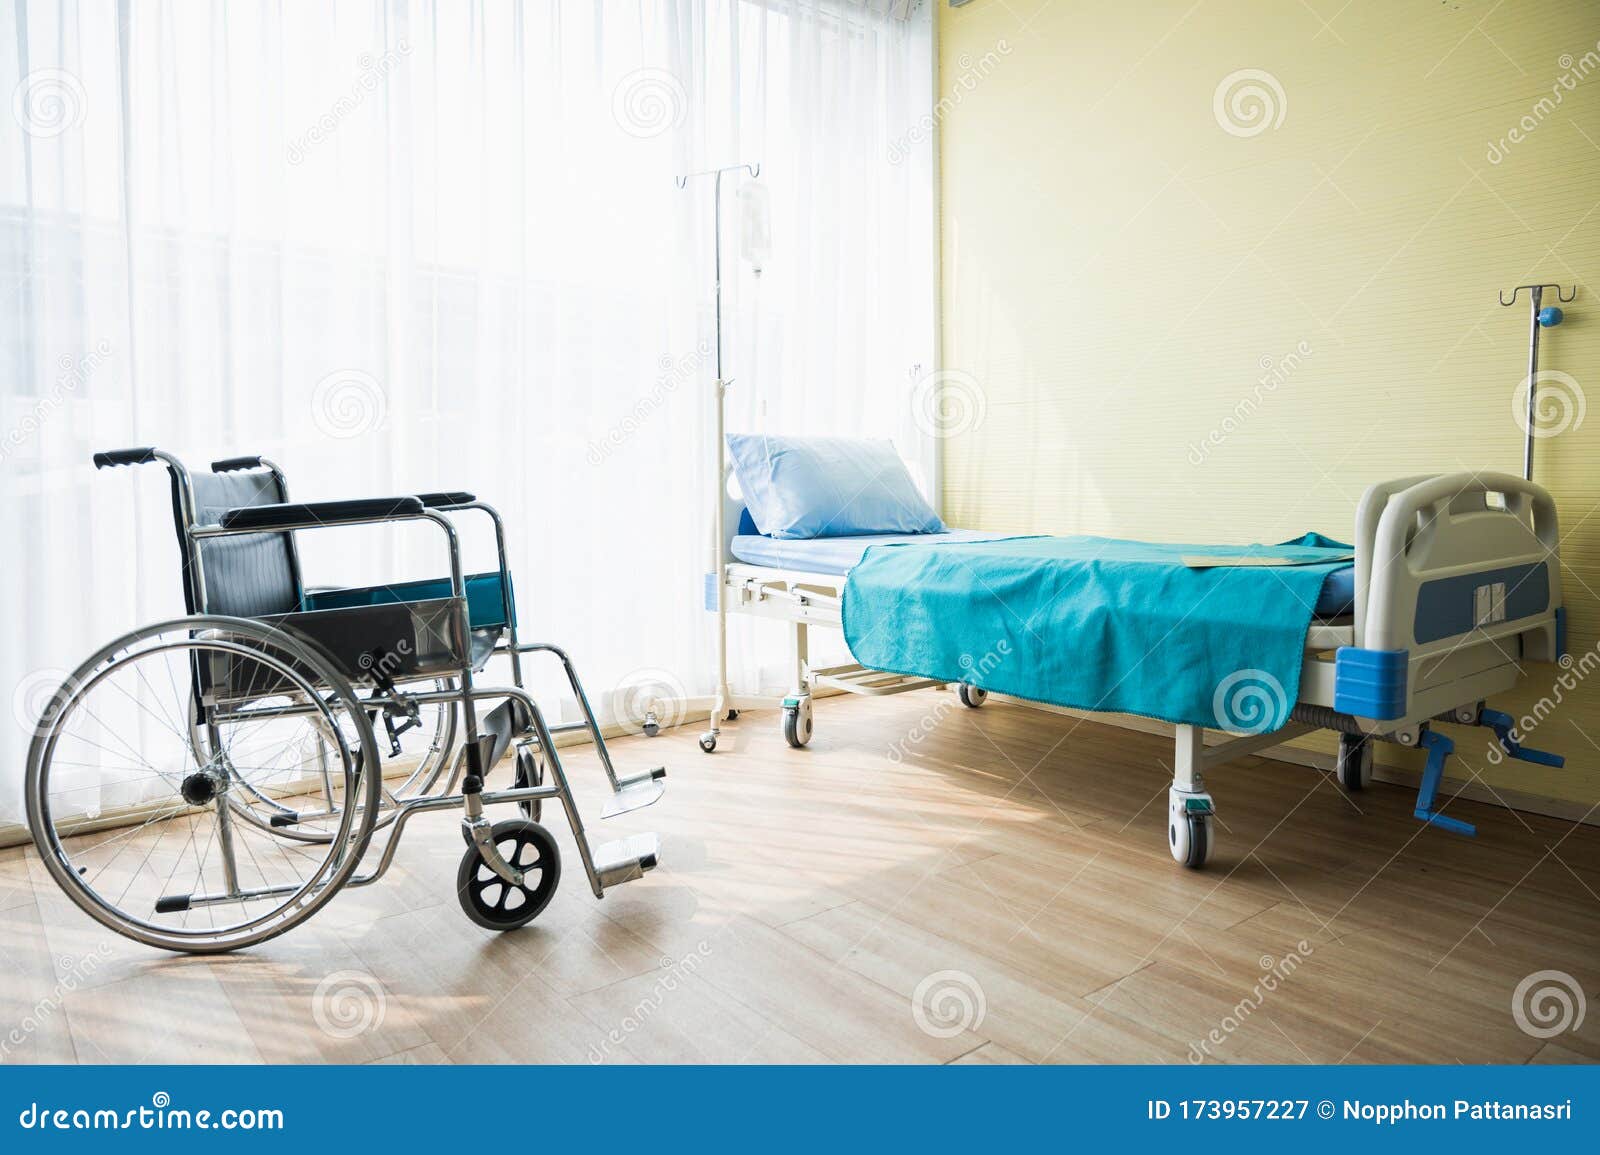 Wheelchair and Patient Bed in Hospital Room Background with Comfortable  Medical Equipped in a Hospital Stock Image - Image of clinic, ligth:  173957227